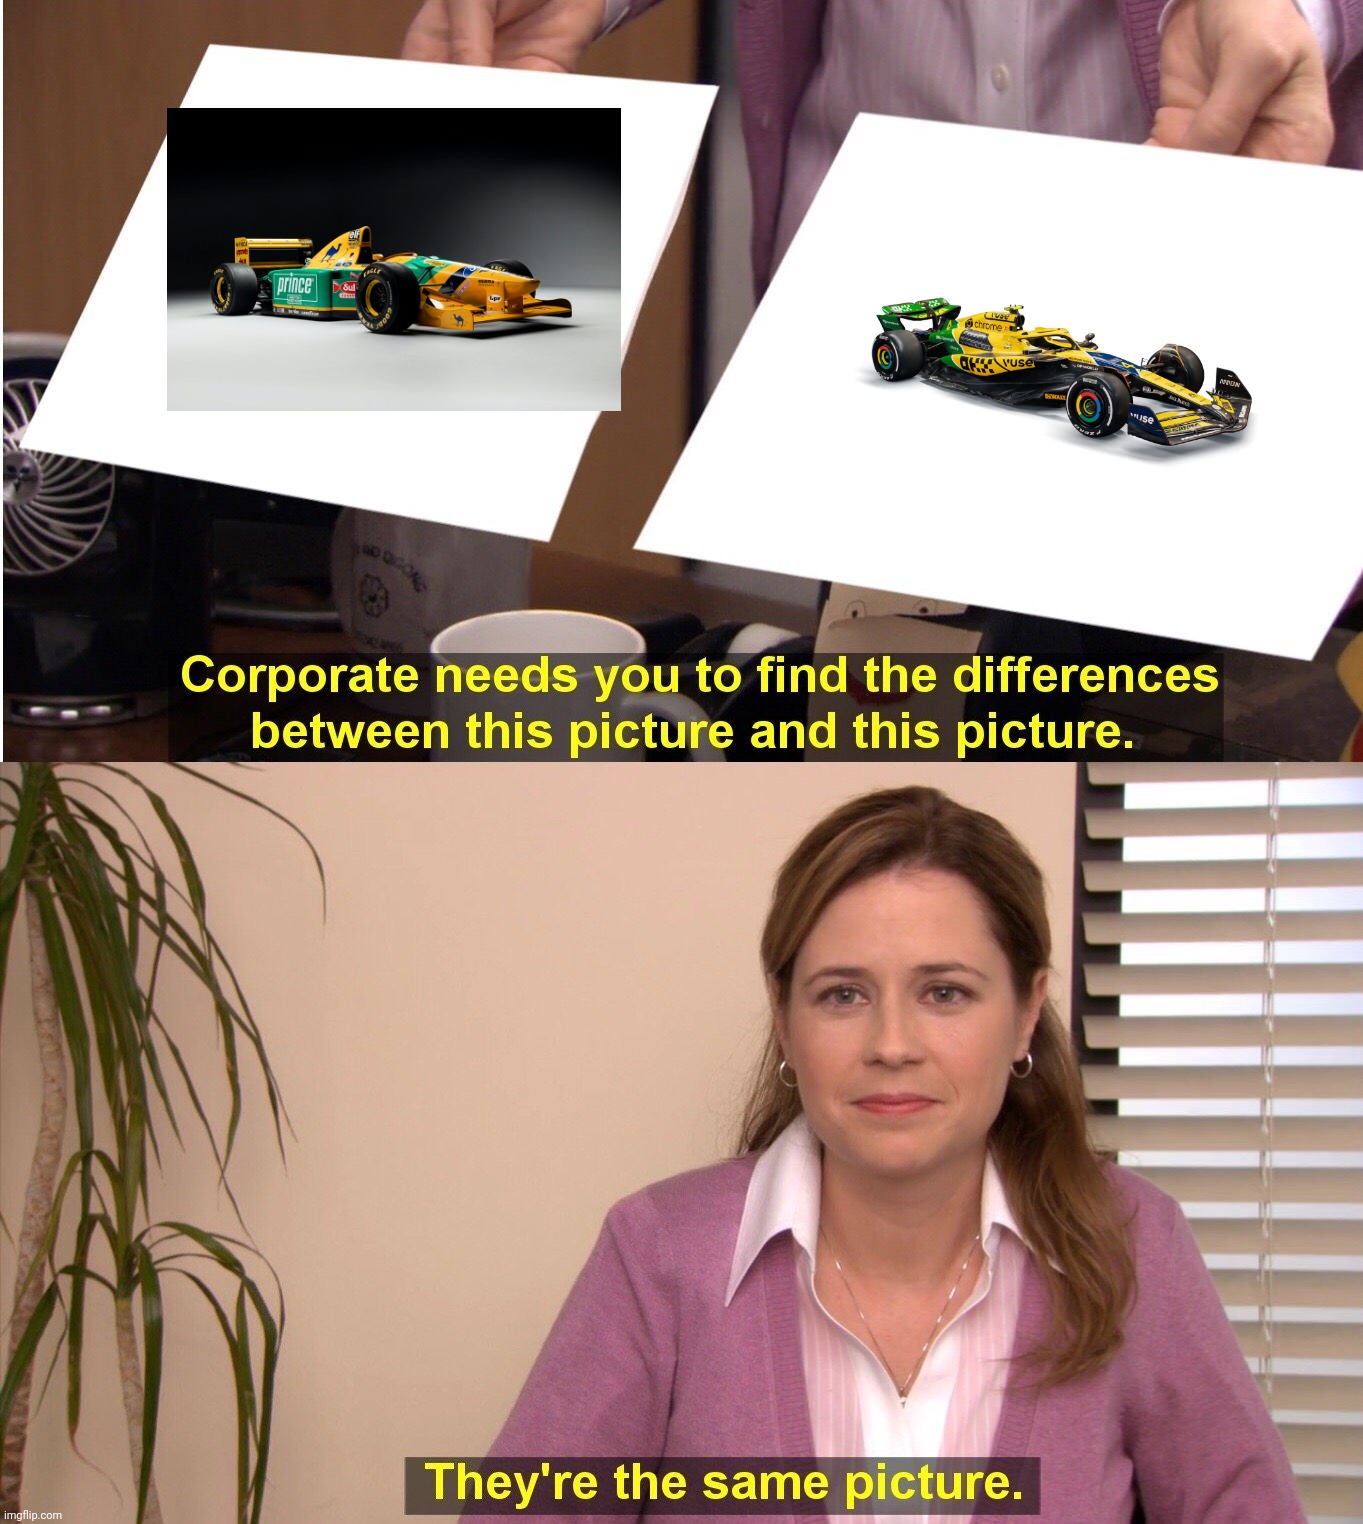 They're The Same Picture | image tagged in memes,they're the same picture,formula 1,green,yellow,blue | made w/ Imgflip meme maker